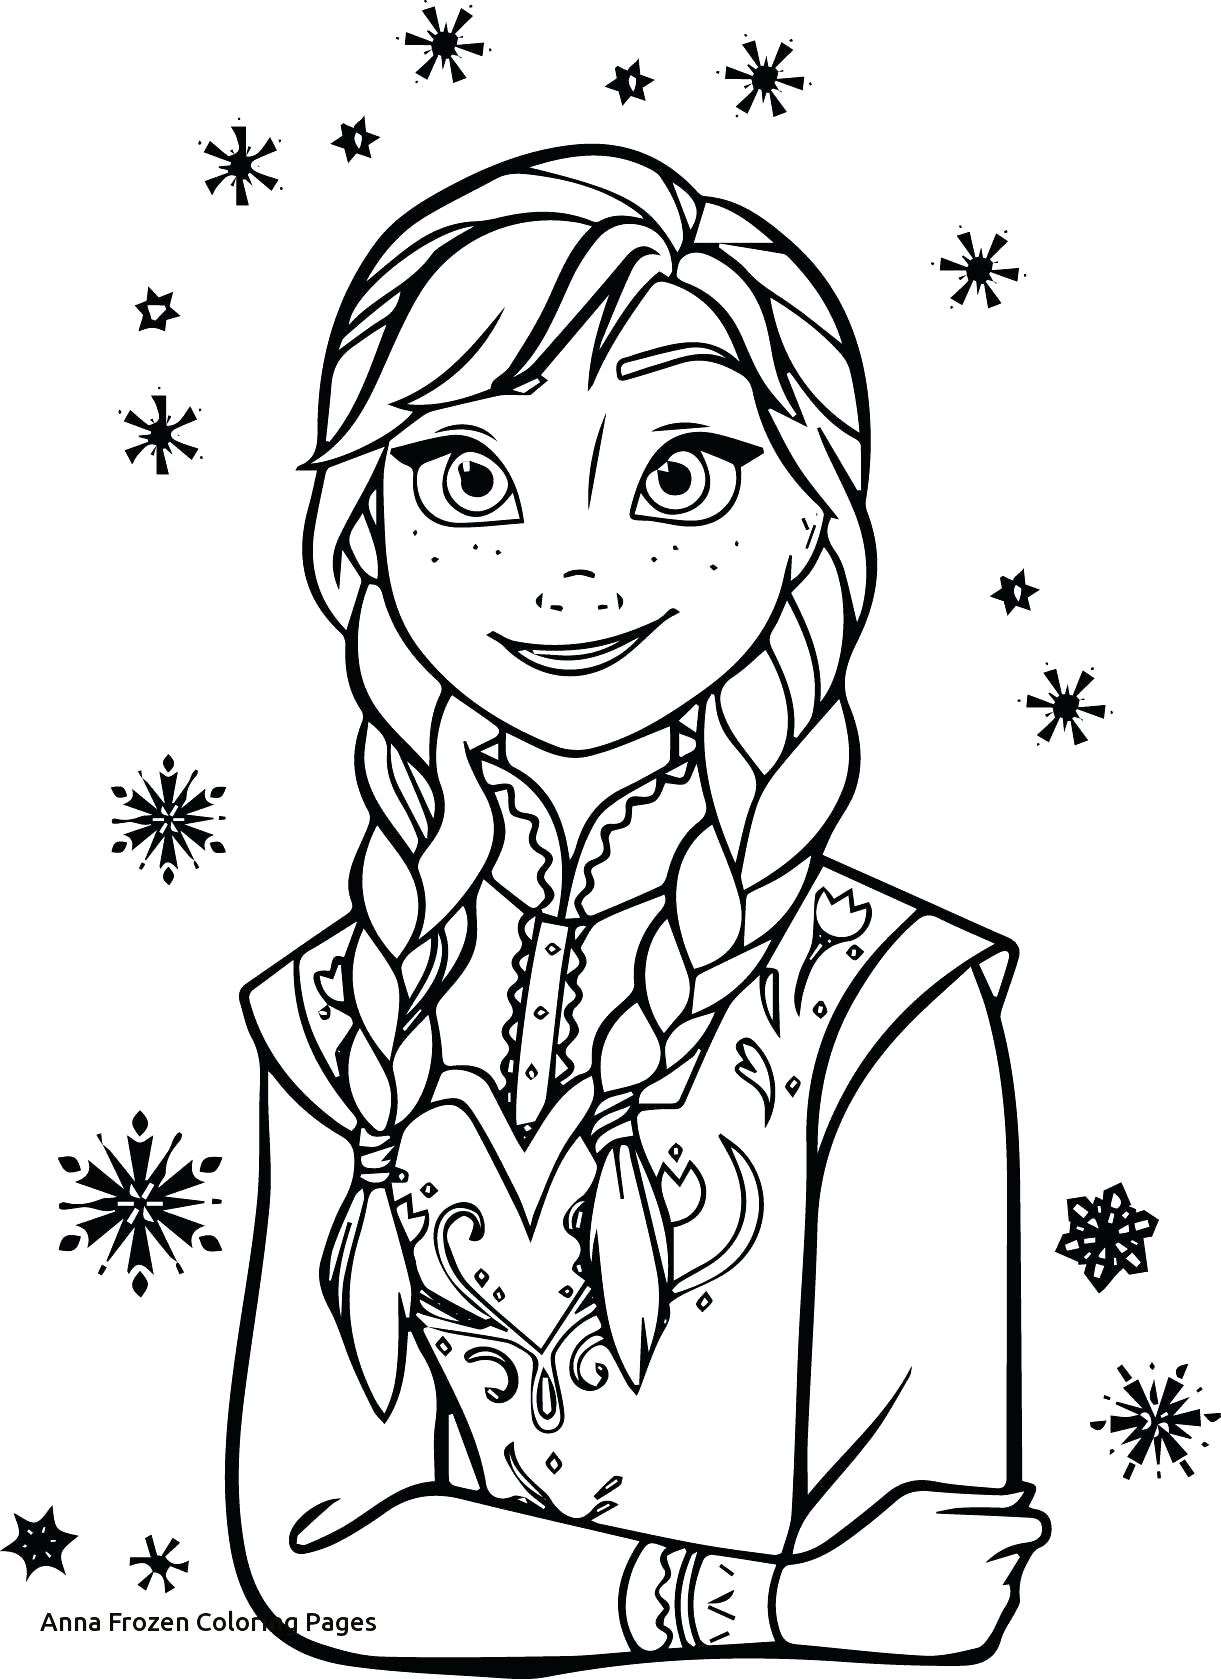 Coloring Pages : Coloring Elsa Frozenoring Disney Printables And ...